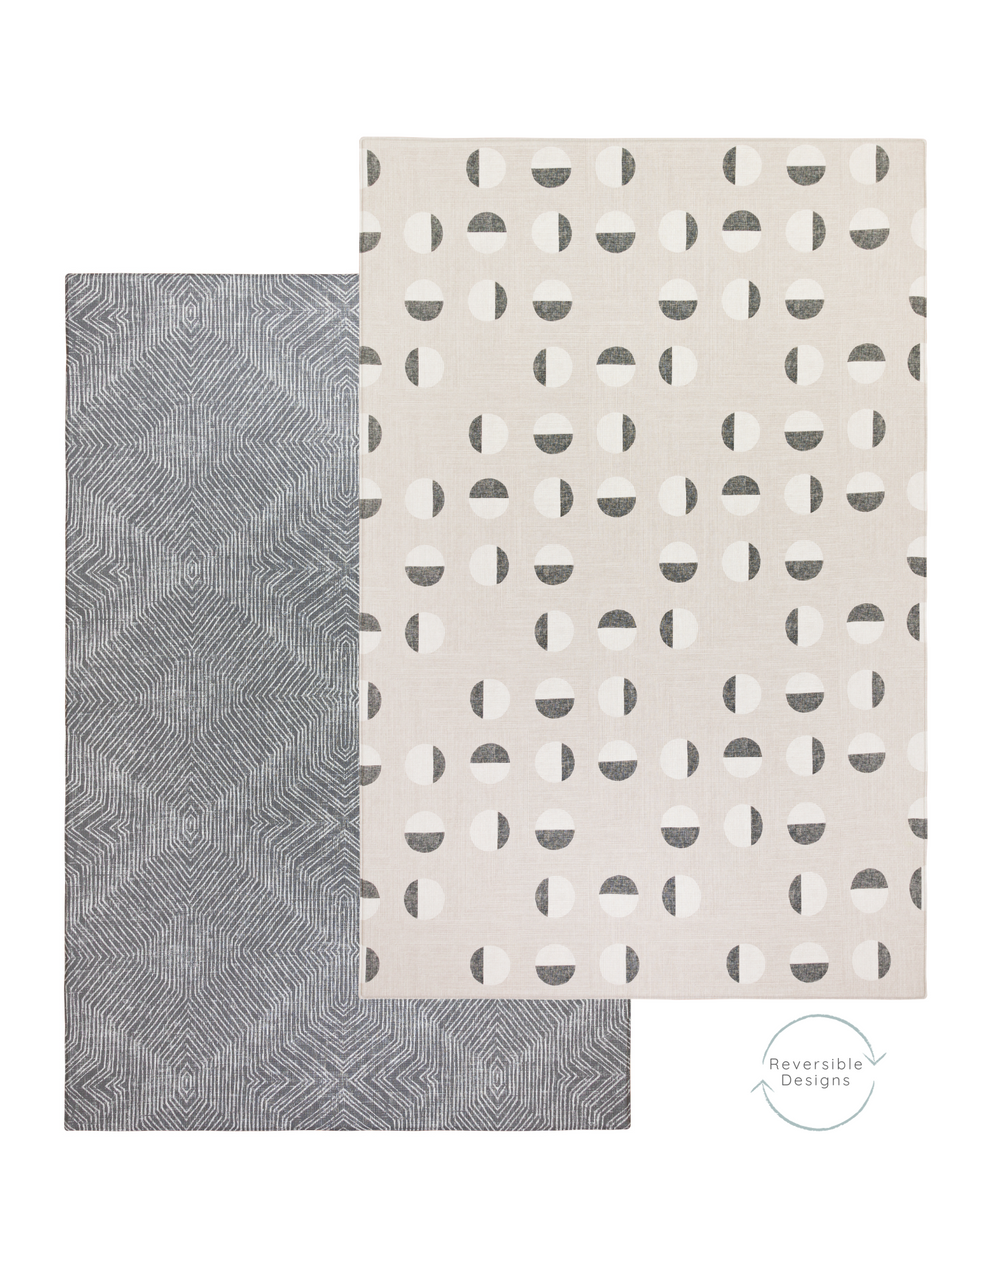 A play mat with a simple and muted two-sided pattern